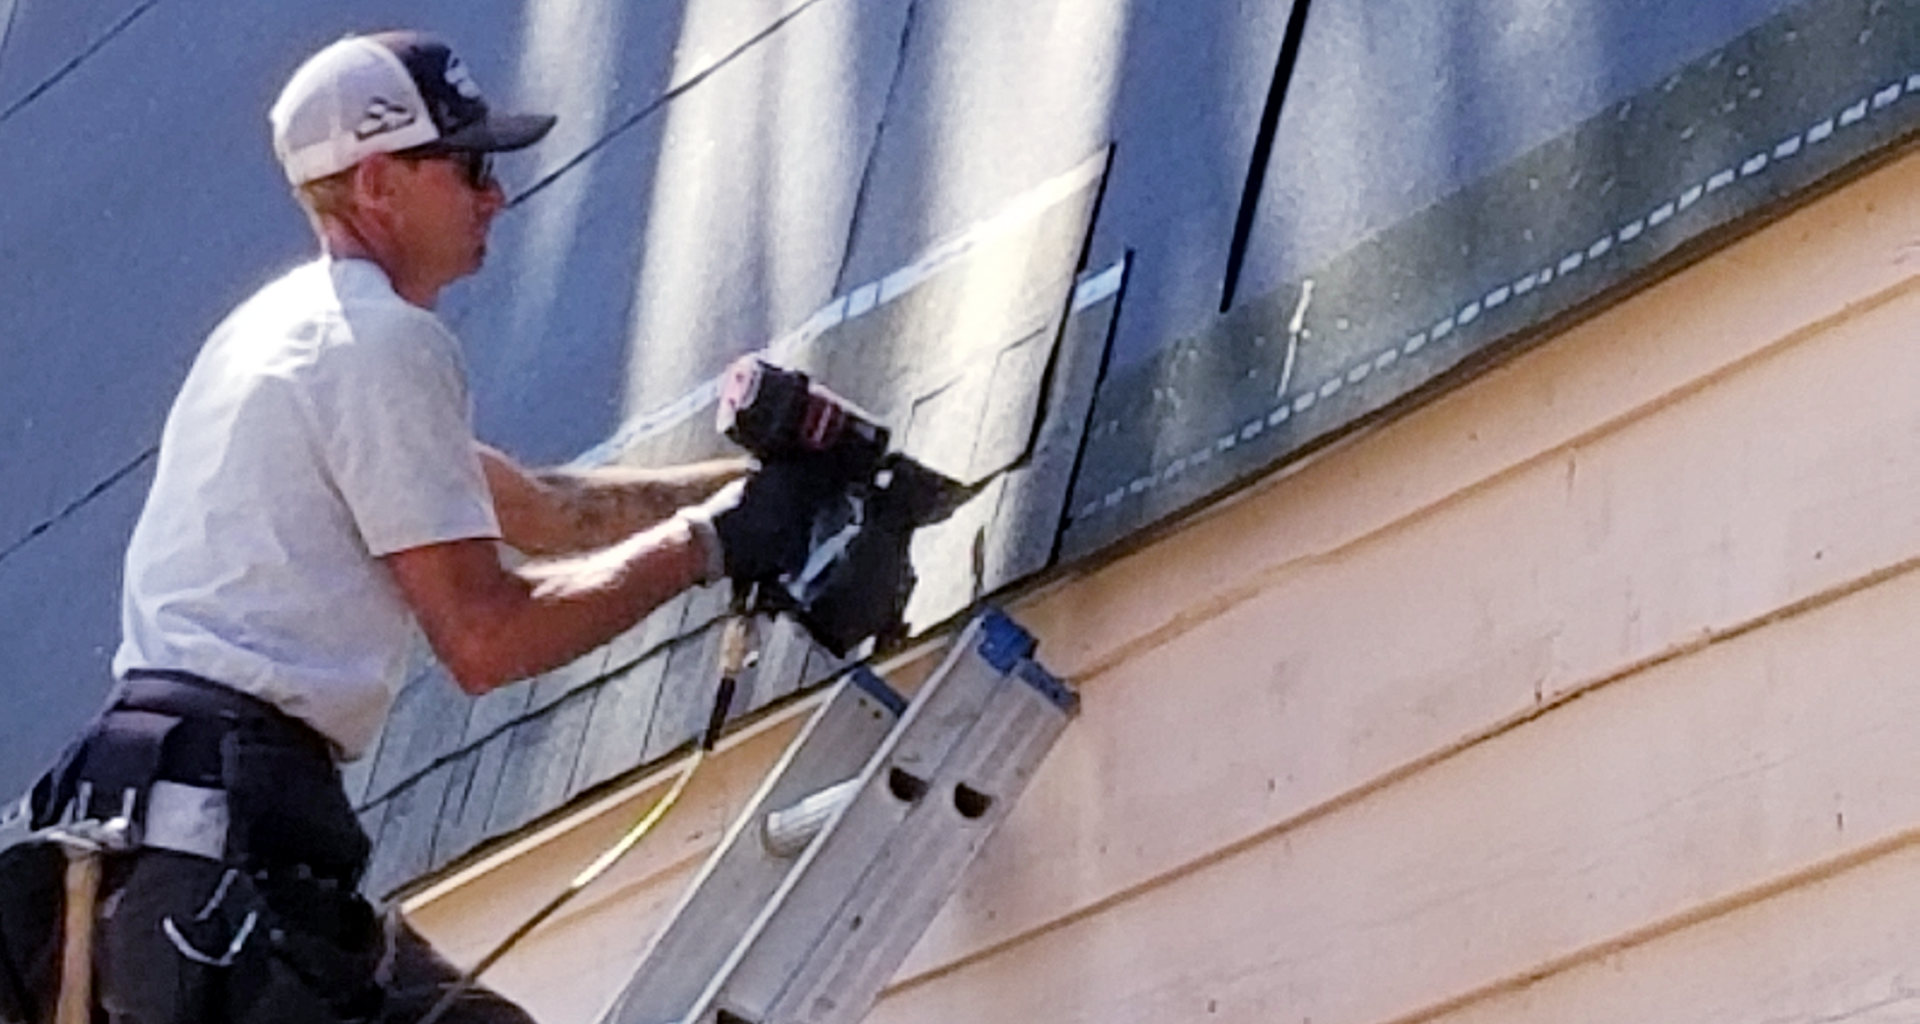 Roofer nailing shingles on a steep mansard roof